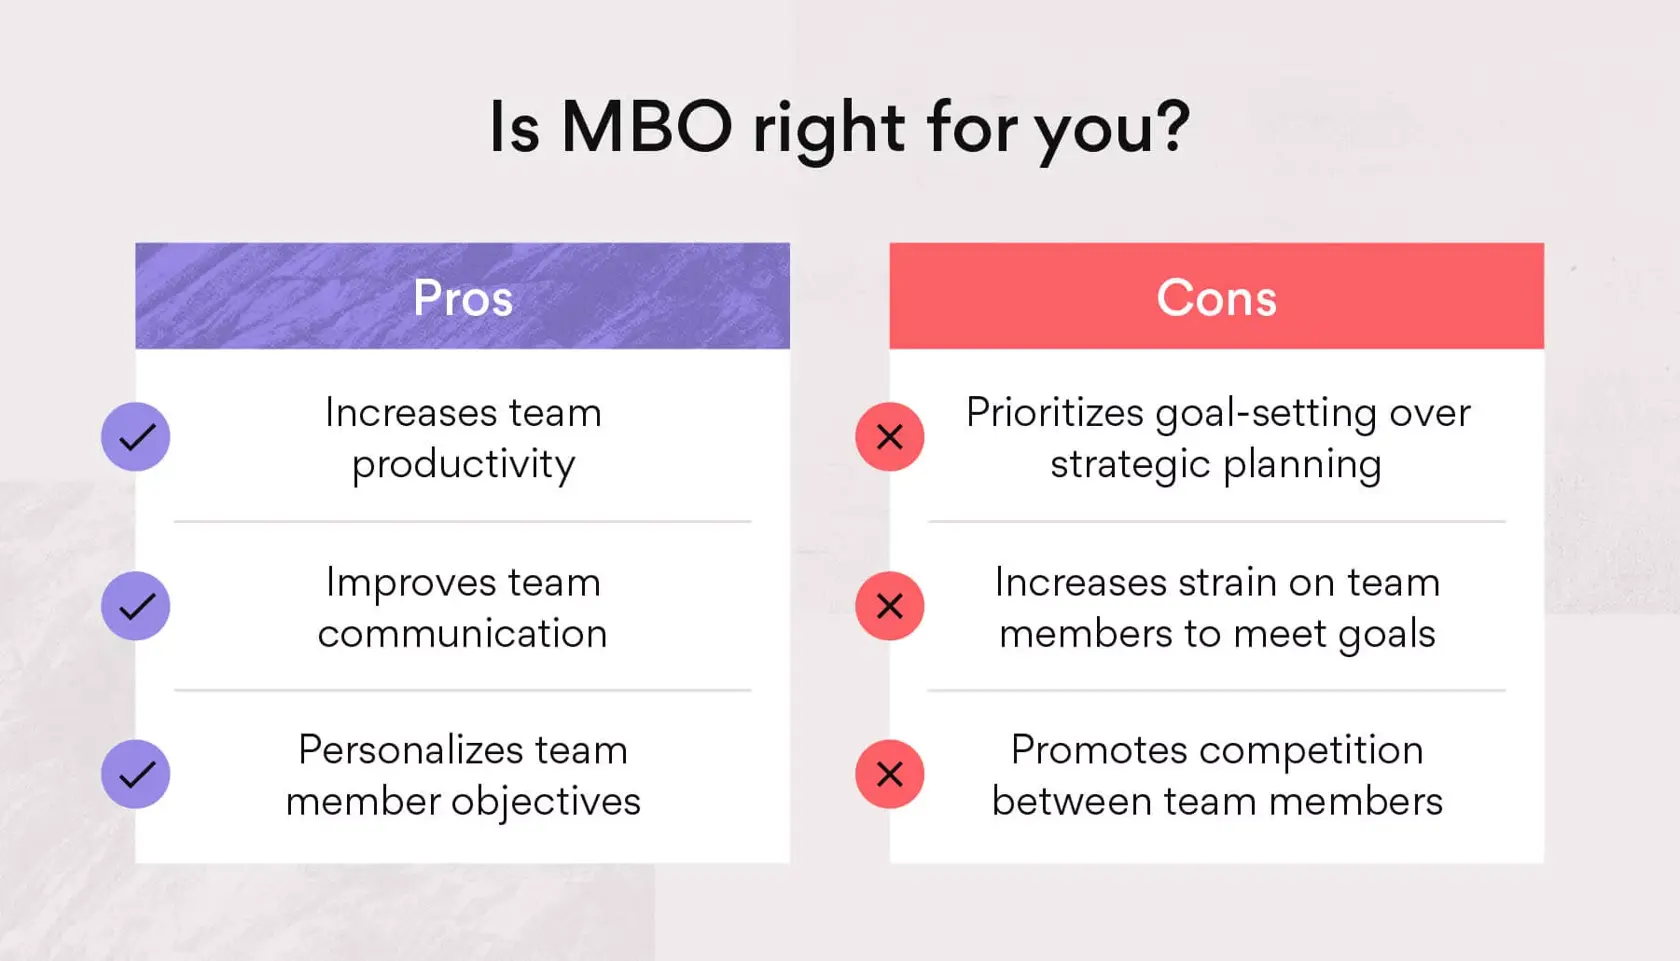 The pros and cons of MBO